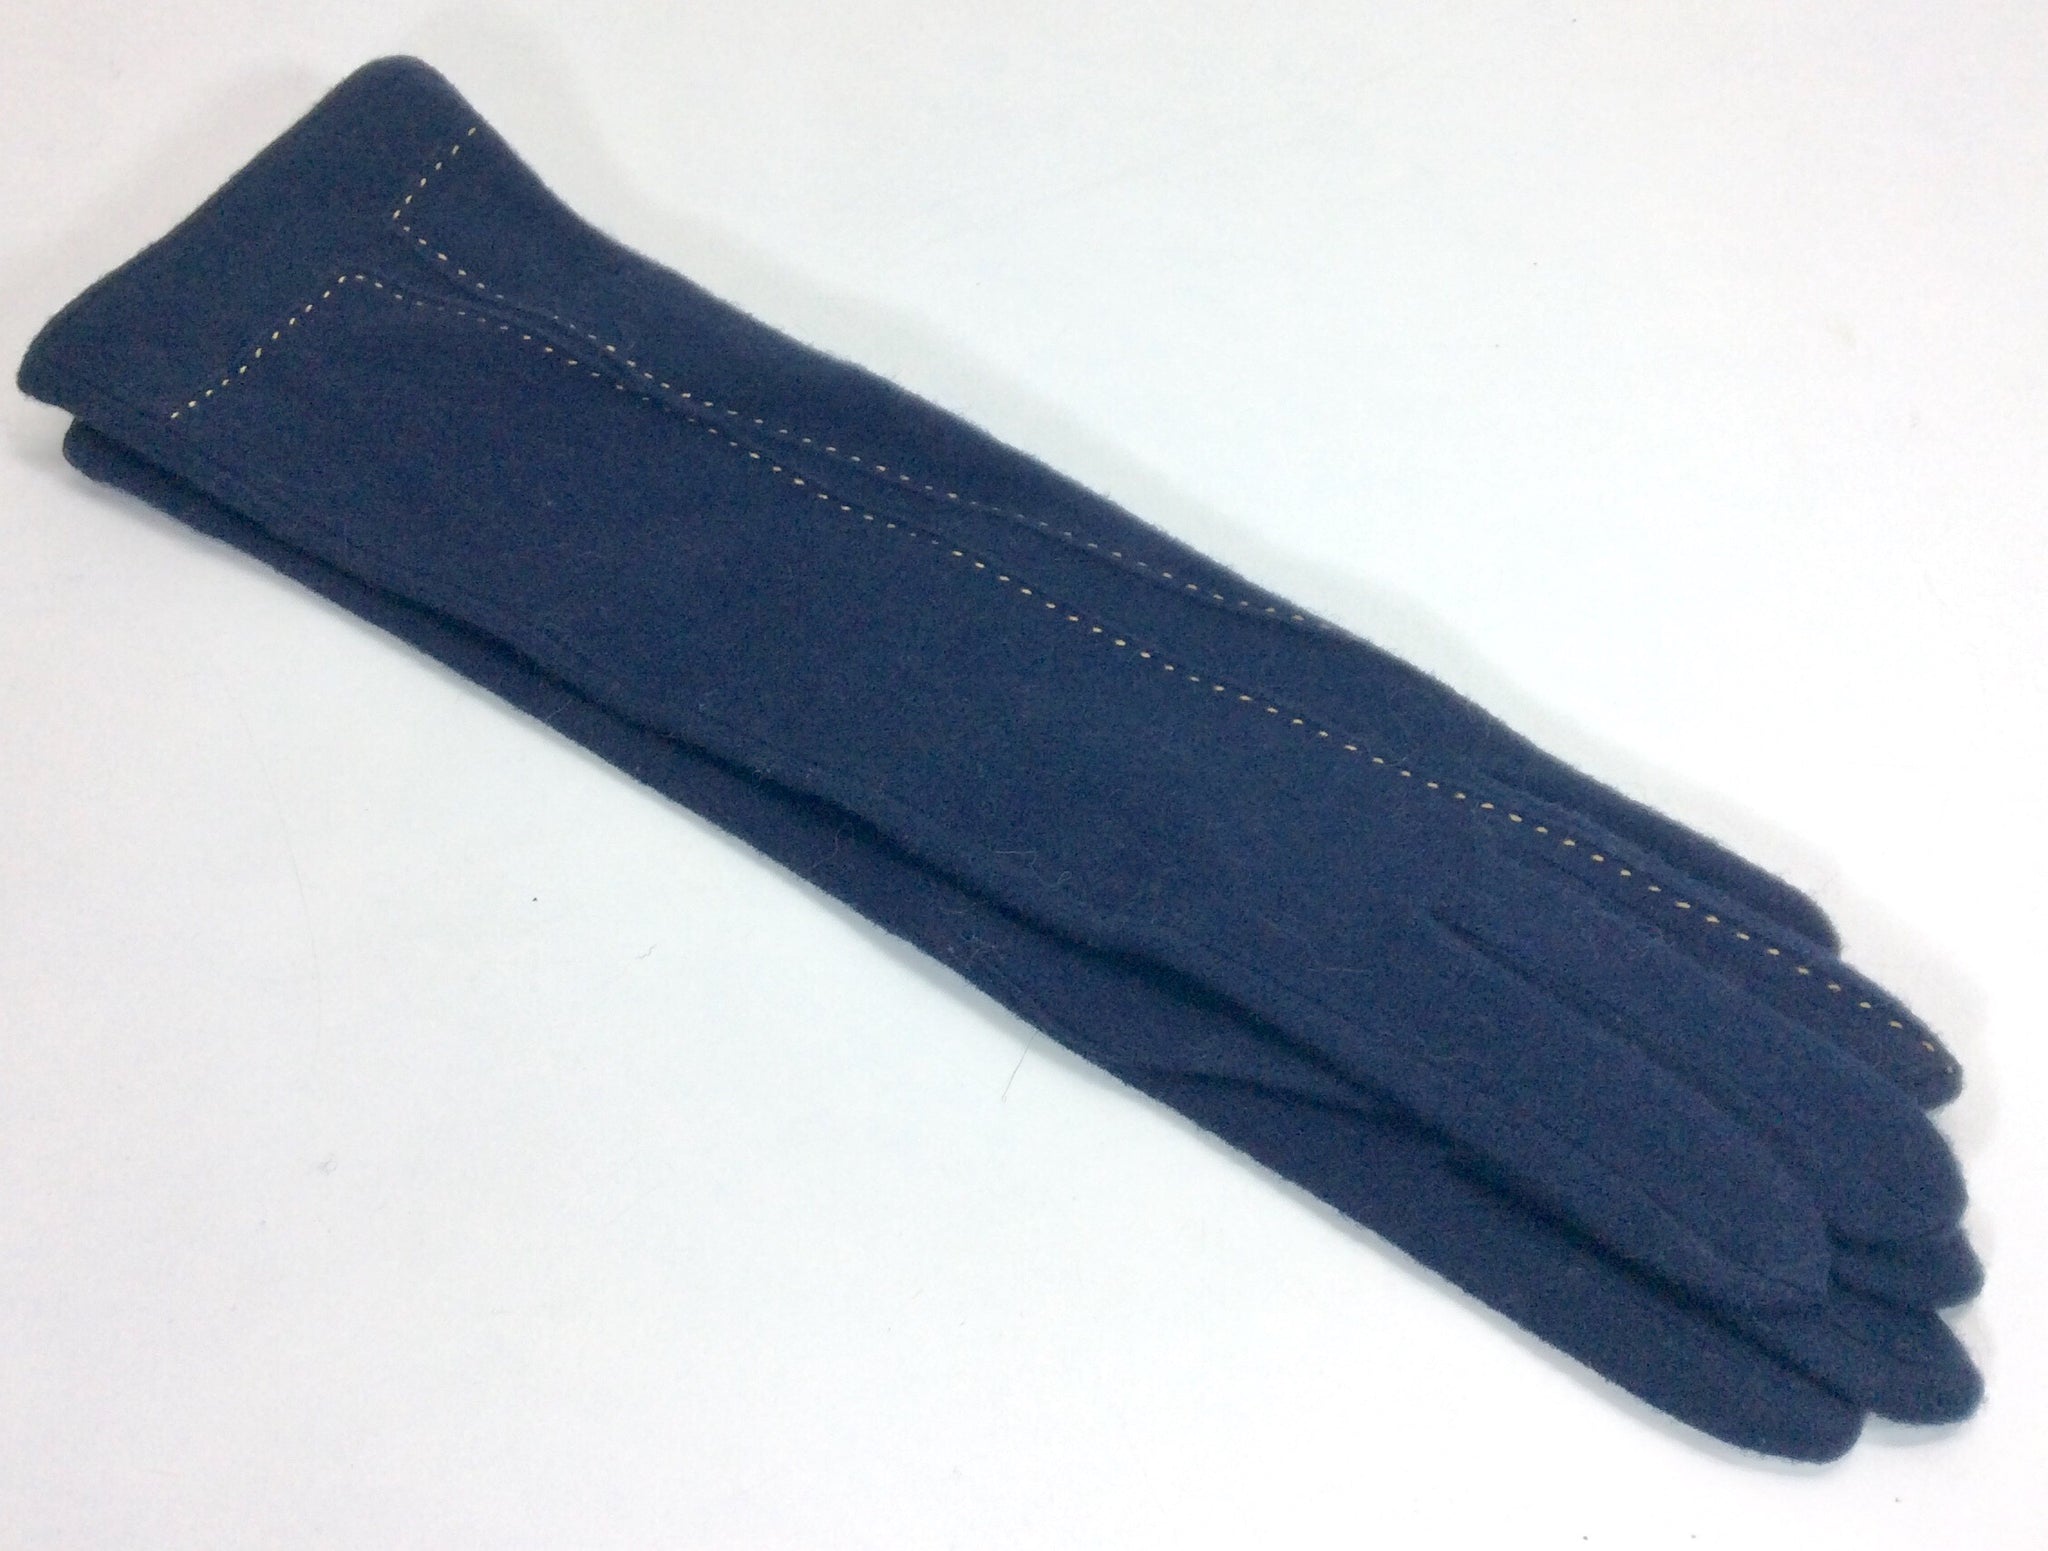 Elbow length navy woollen gloves with taupe stitching detail